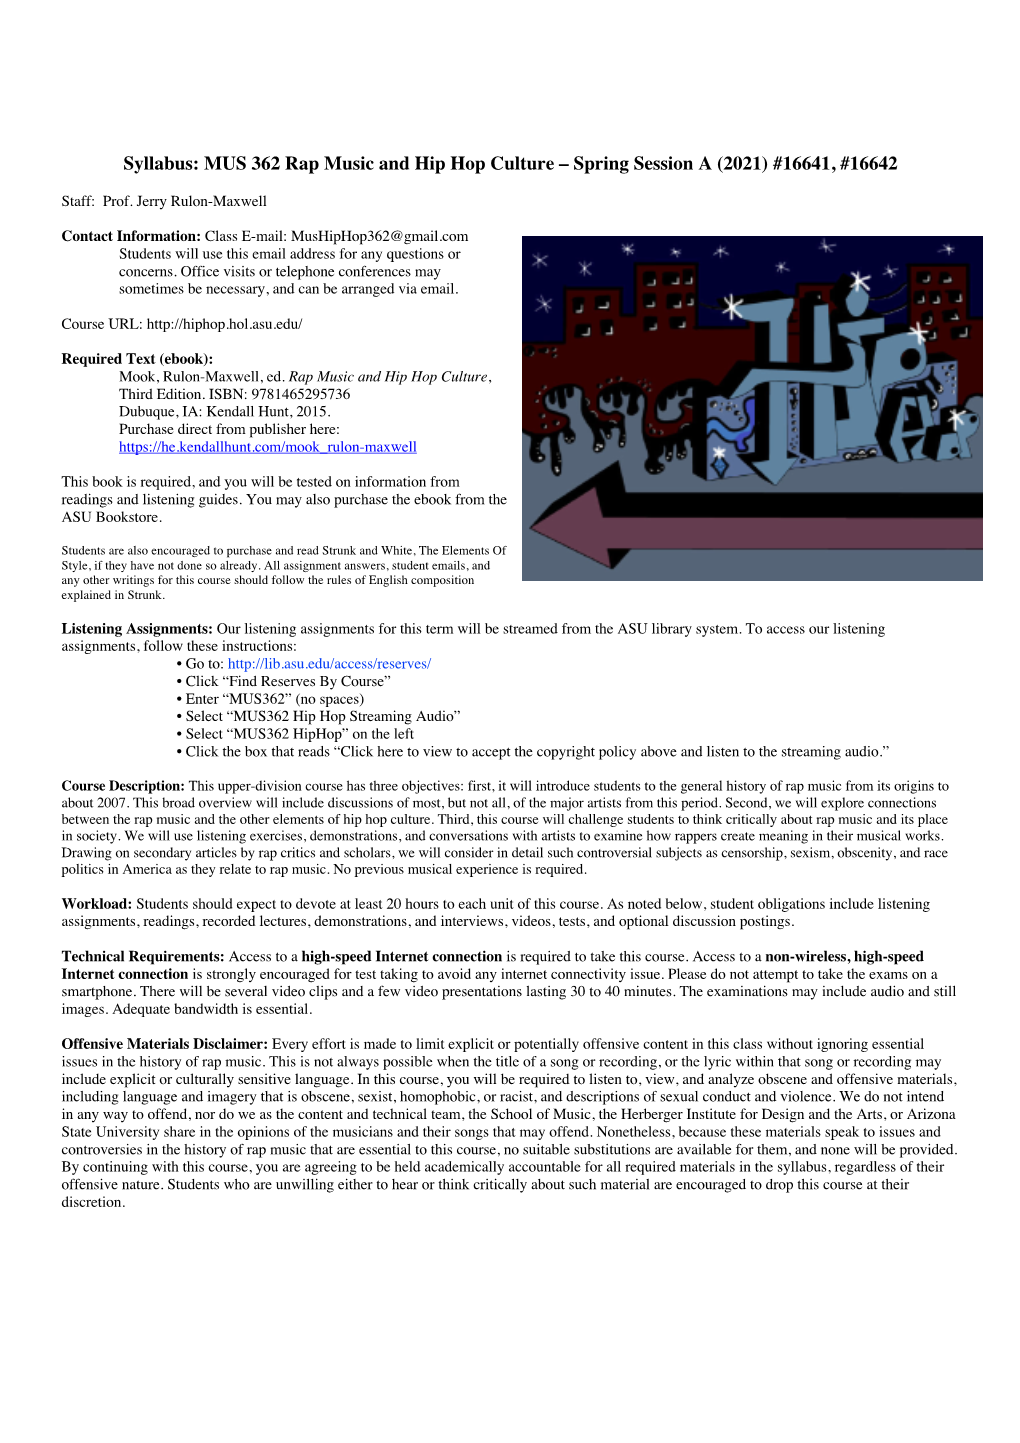 Syllabus: MUS 362 Rap Music and Hip Hop Culture – Spring Session a (2021) #16641, #16642